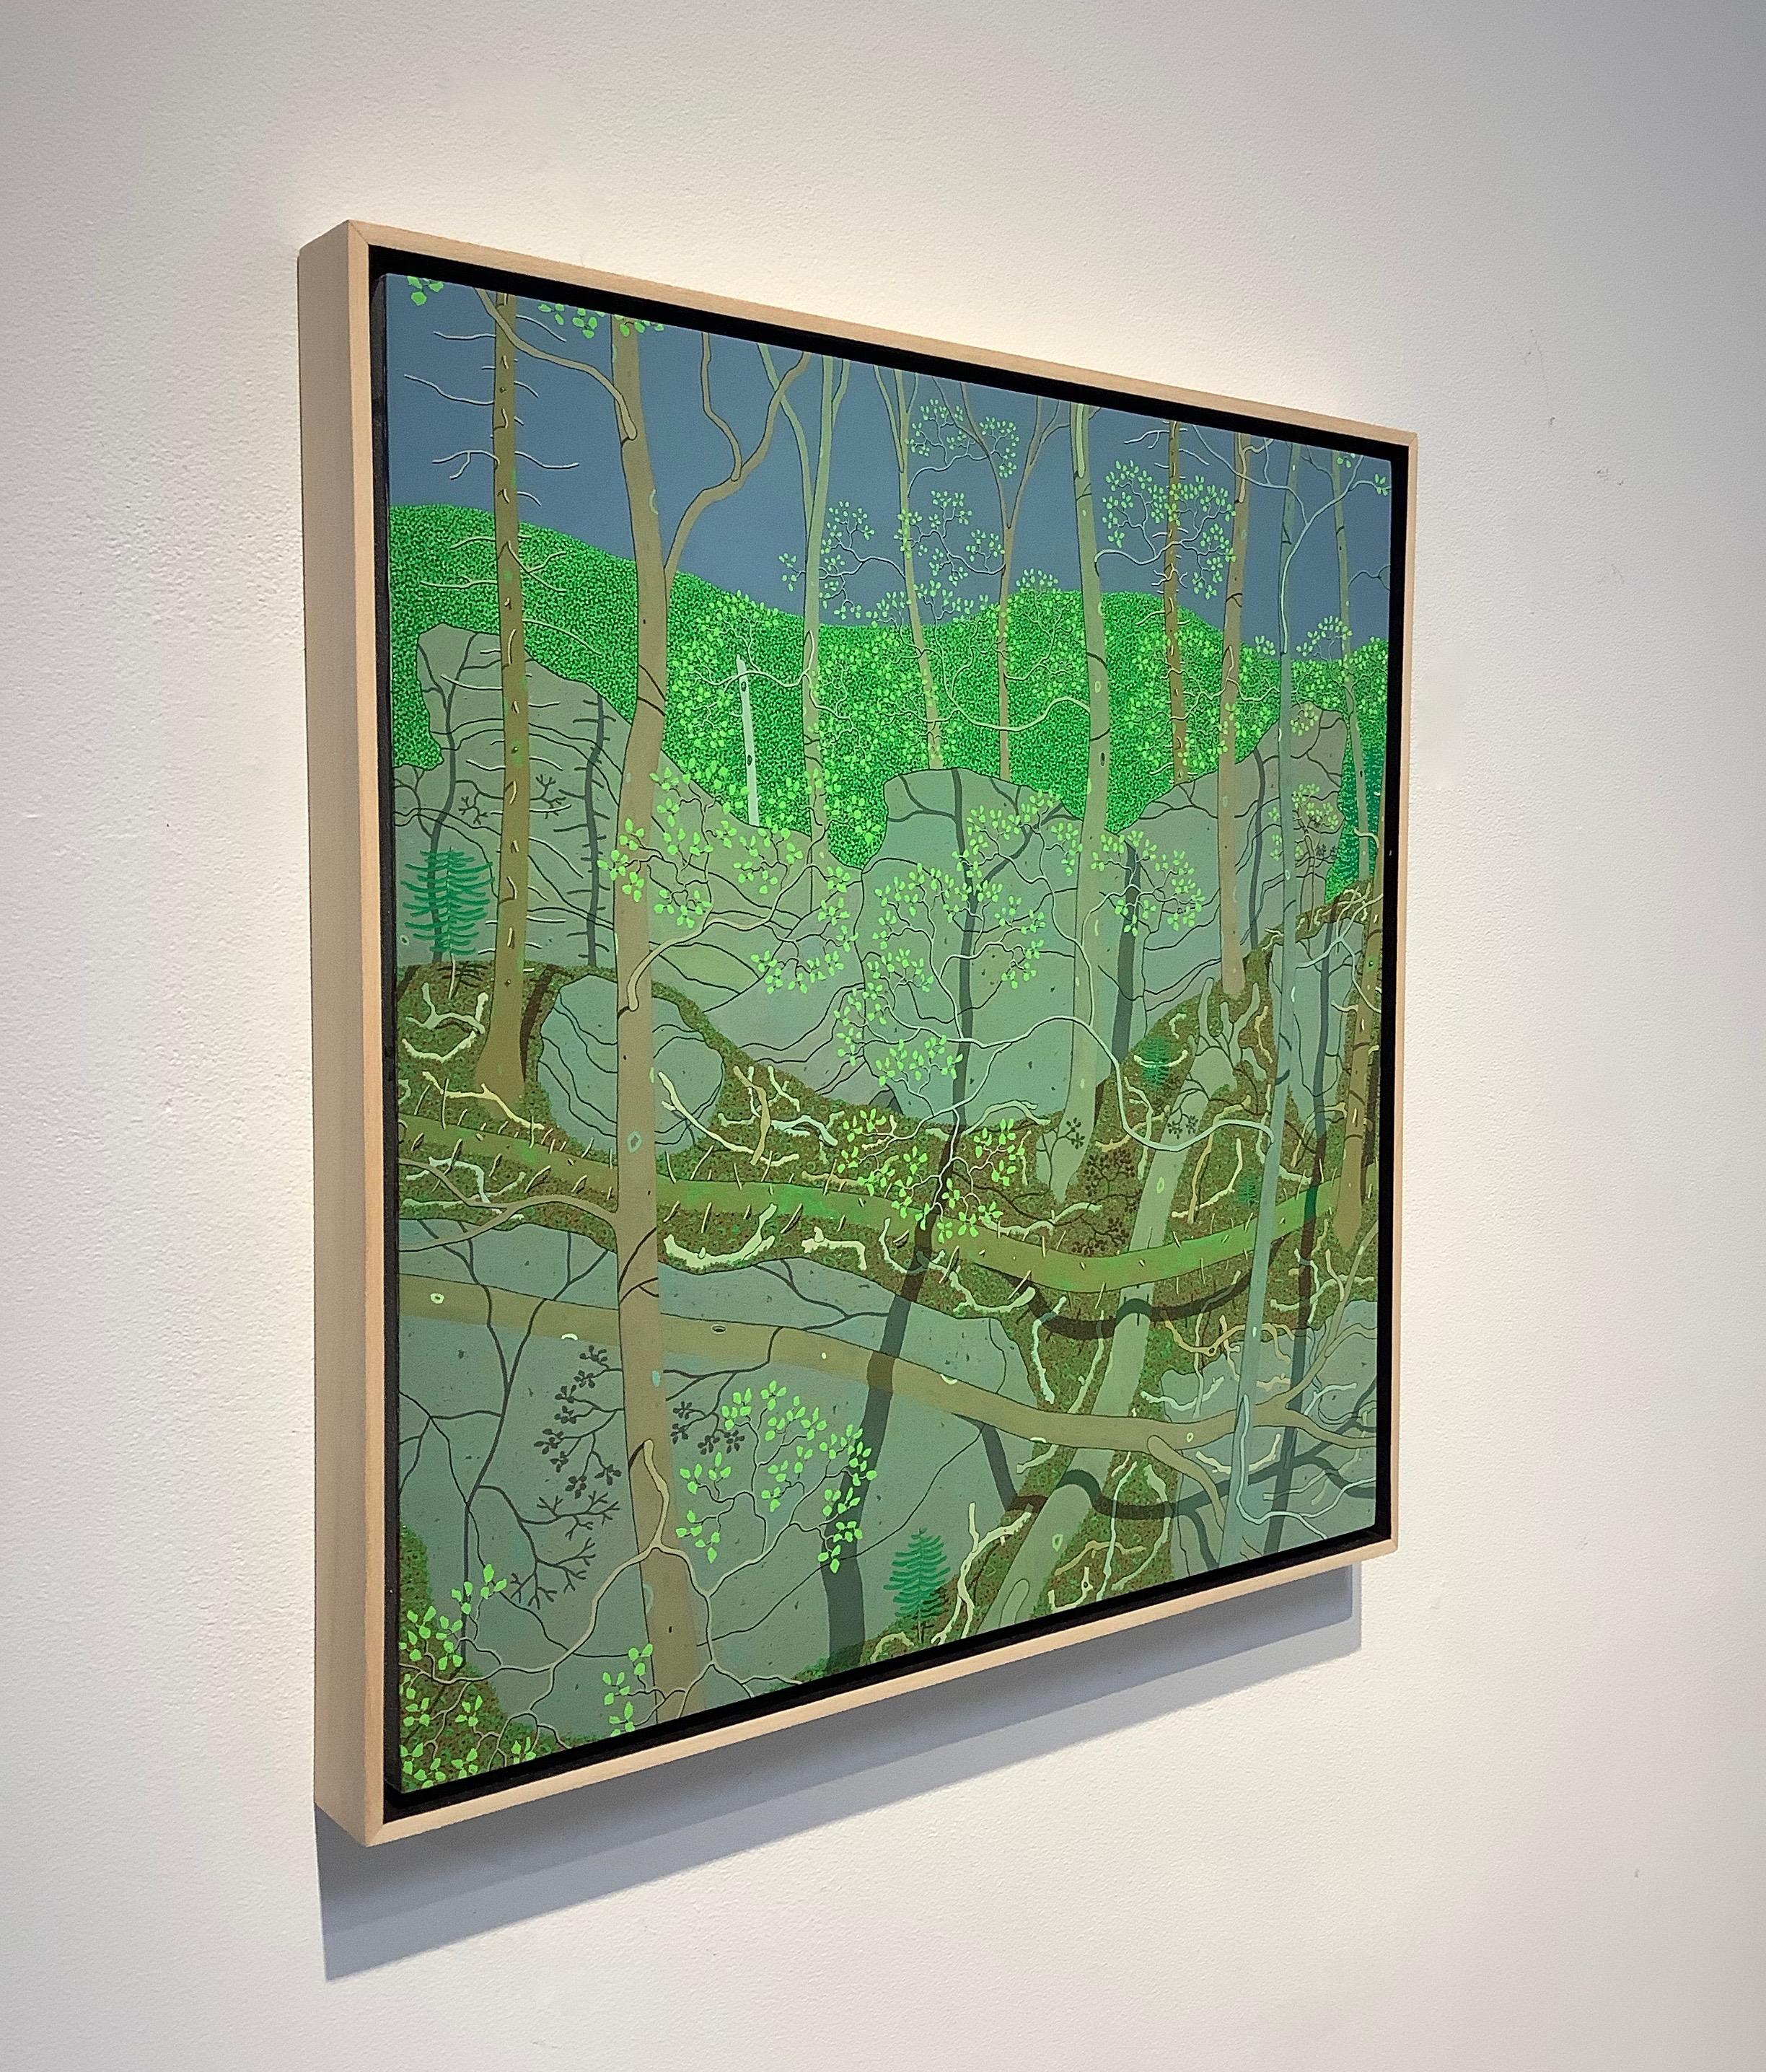 The densely treed forest of Hennen's Virginia home are the subject for this rich, highly detailed painting. The many shades of green in the foliage, the pale brown and beige tree trunks and soft gray boulders allude to the peace of the forest and